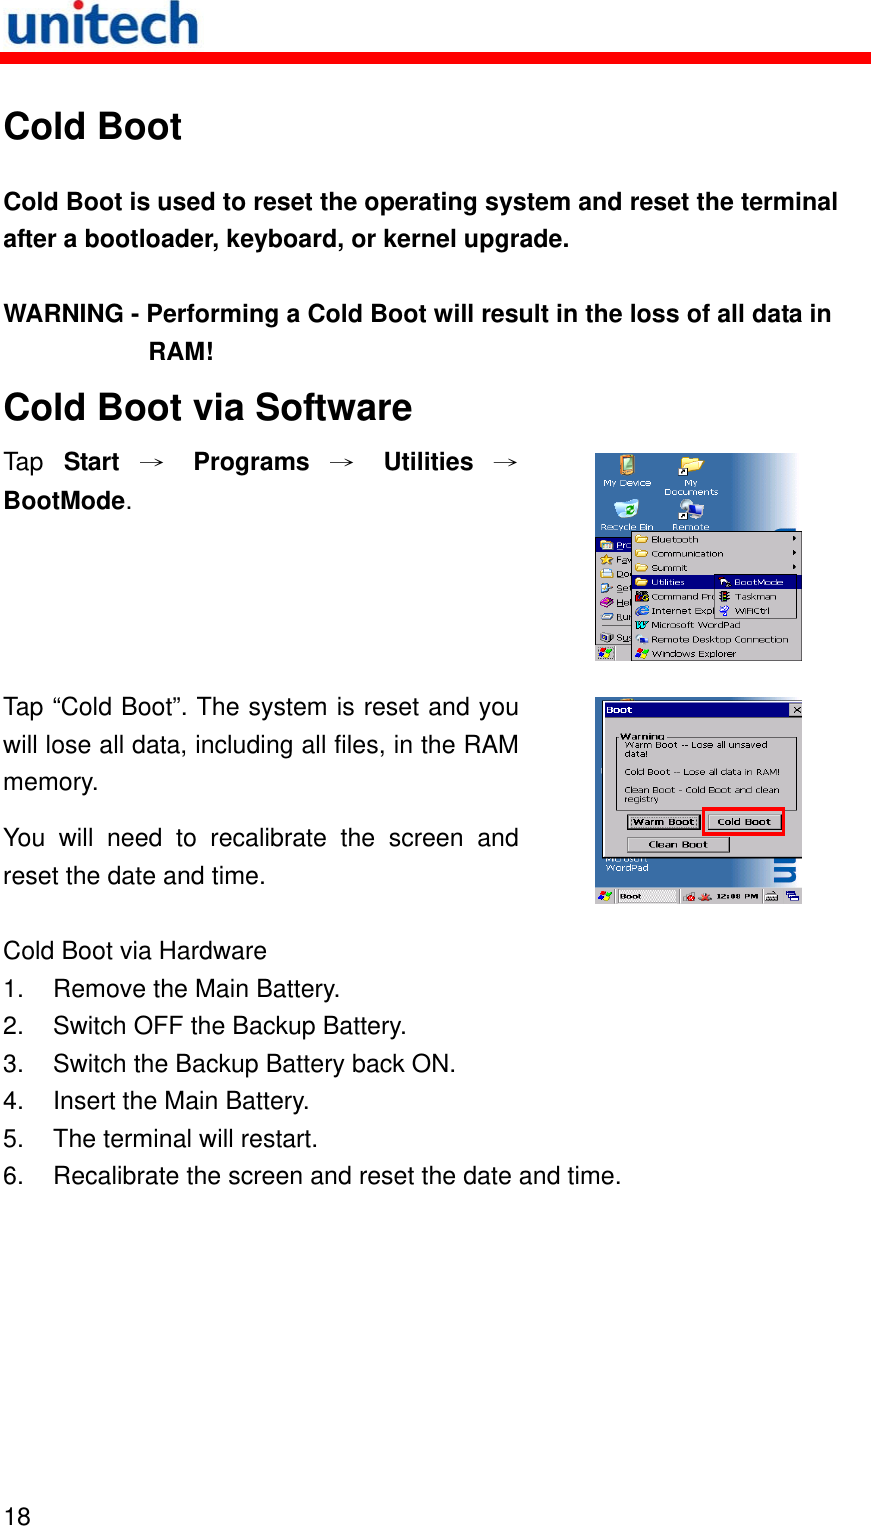   18  Cold Boot Cold Boot is used to reset the operating system and reset the terminal after a bootloader, keyboard, or kernel upgrade. WARNING - Performing a Cold Boot will result in the loss of all data in RAM! Cold Boot via Software Tap  Start → Programs → Utilities →BootMode.  Tap “Cold Boot”. The system is reset and you will lose all data, including all files, in the RAM memory. You will need to recalibrate the screen and reset the date and time.   Cold Boot via Hardware 1.  Remove the Main Battery. 2.  Switch OFF the Backup Battery. 3.  Switch the Backup Battery back ON. 4.  Insert the Main Battery. 5.  The terminal will restart. 6.  Recalibrate the screen and reset the date and time. 